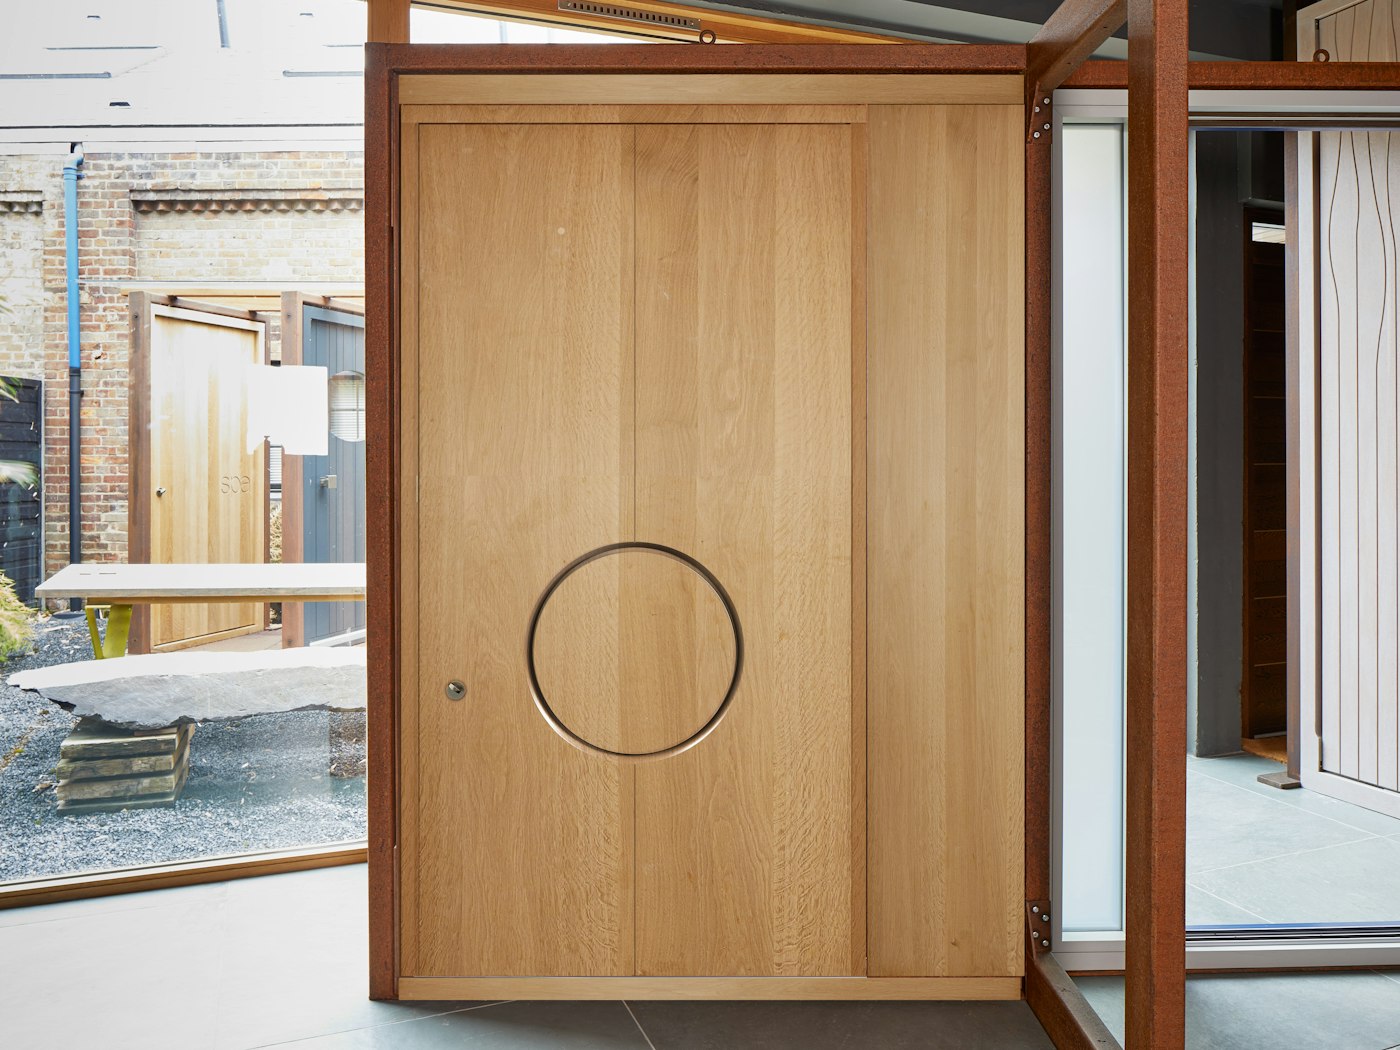 Simple, striking design - the "Ring" in European oak shows an eye-catching, concealed circular handle